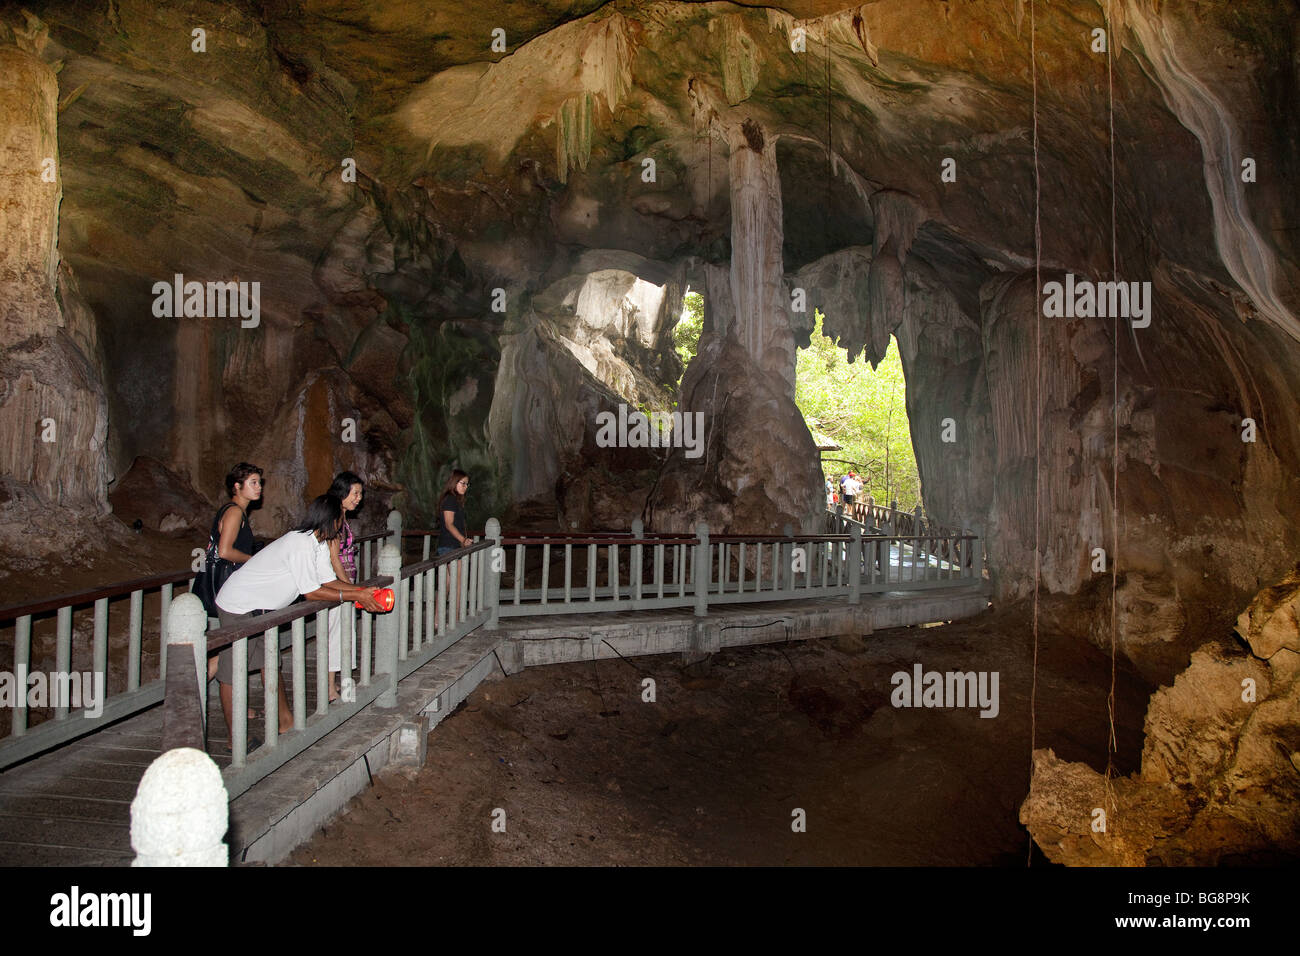 Langkawi Geopark, Malaysia, Bat cave granite interior with tourists on walkway Stock Photo